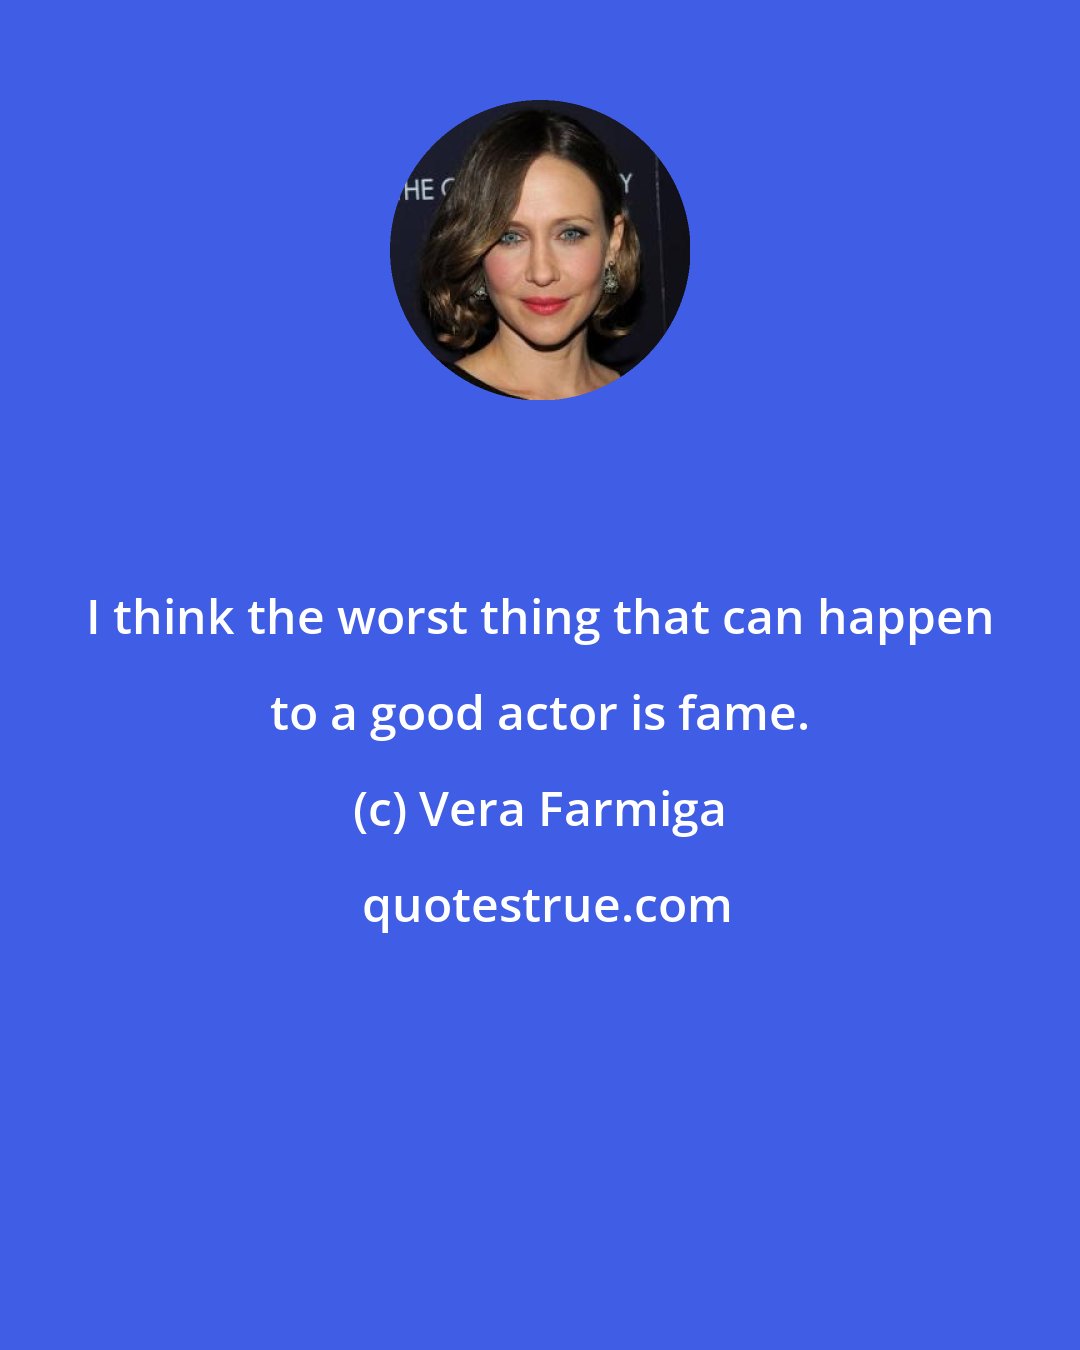 Vera Farmiga: I think the worst thing that can happen to a good actor is fame.